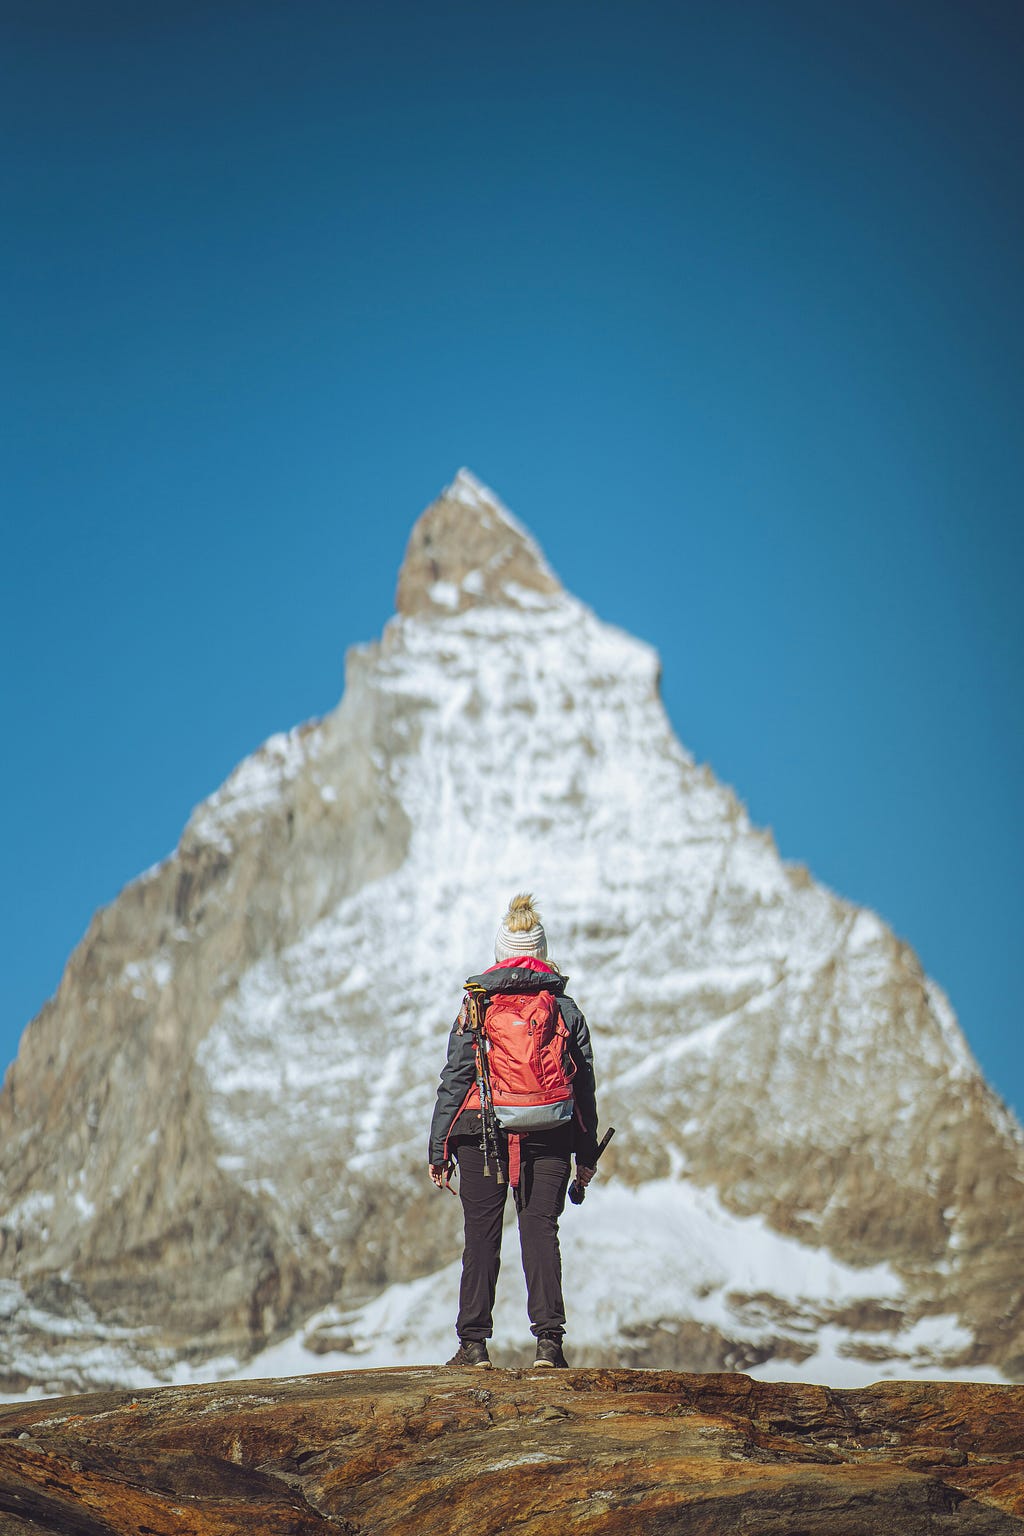 A person climbing a huge mountain with a clear blue sky behind the peak.